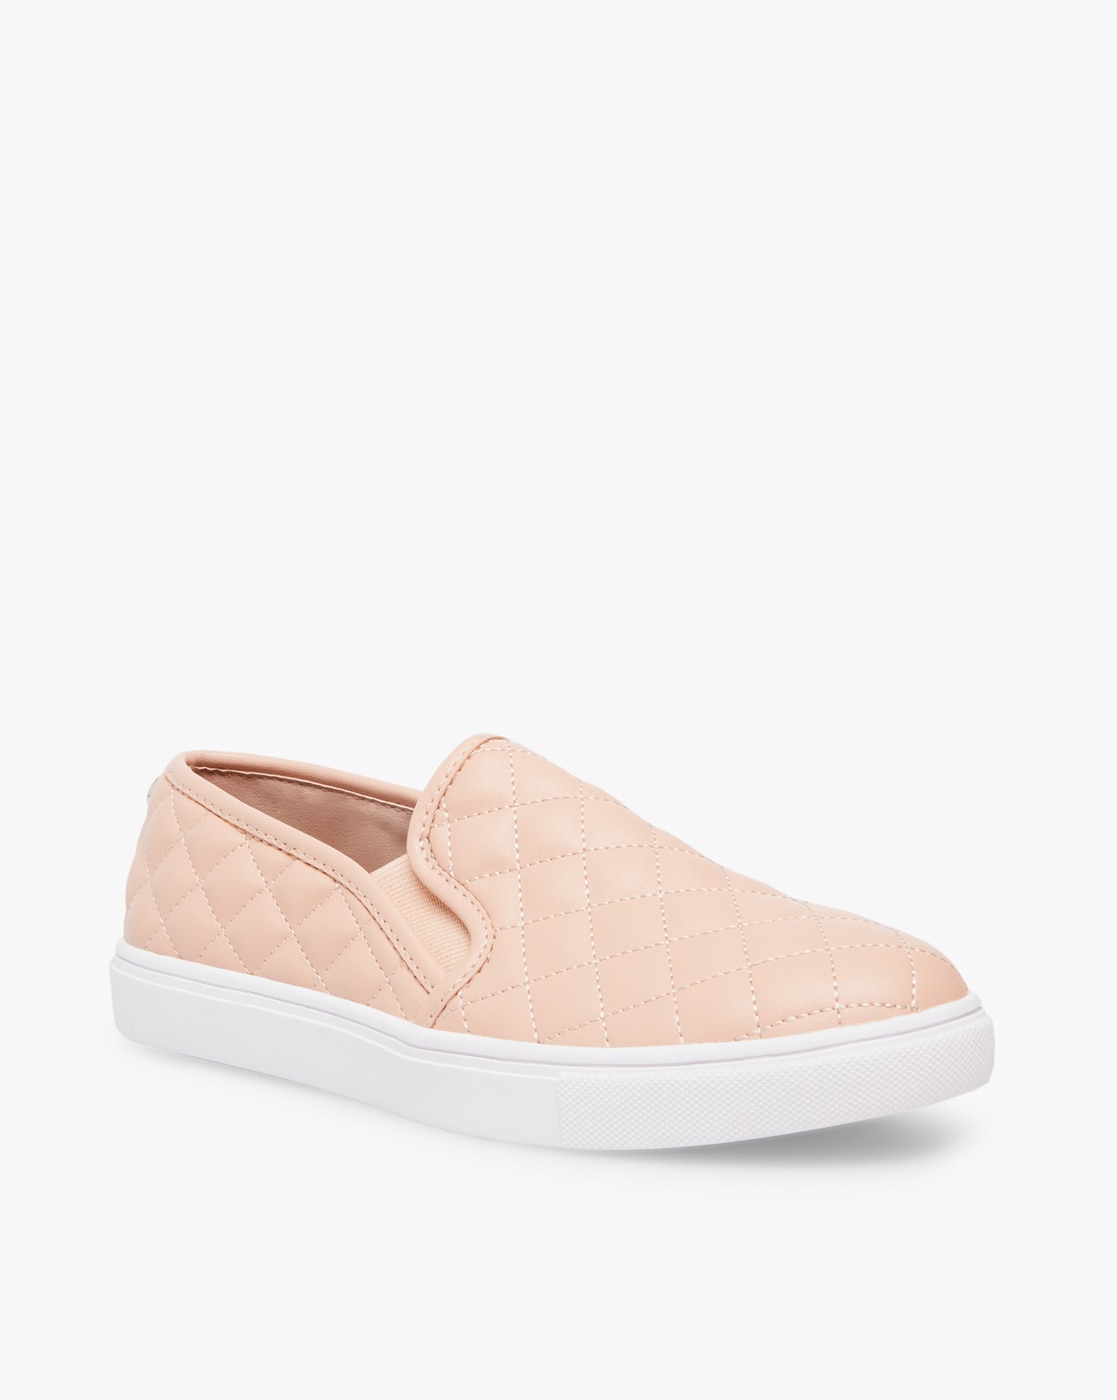 steve madden pink quilted shoes